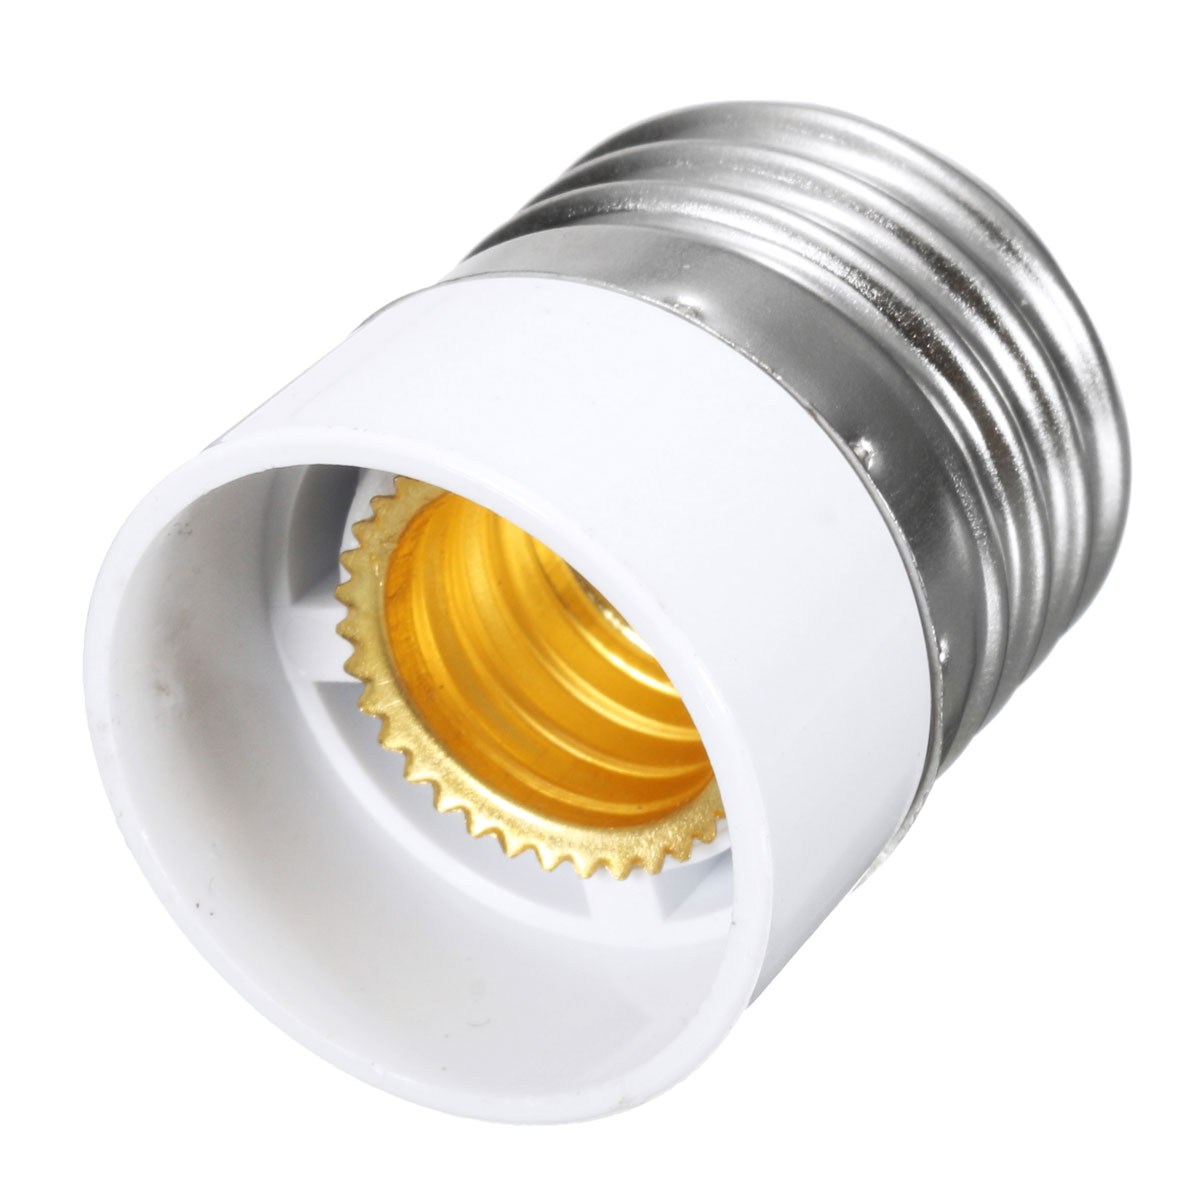 Find E27 to E14 Base LED Light Lamp Bulb Adapter Adaptor Converter Screw Socket Fit for Sale on Gipsybee.com with cryptocurrencies